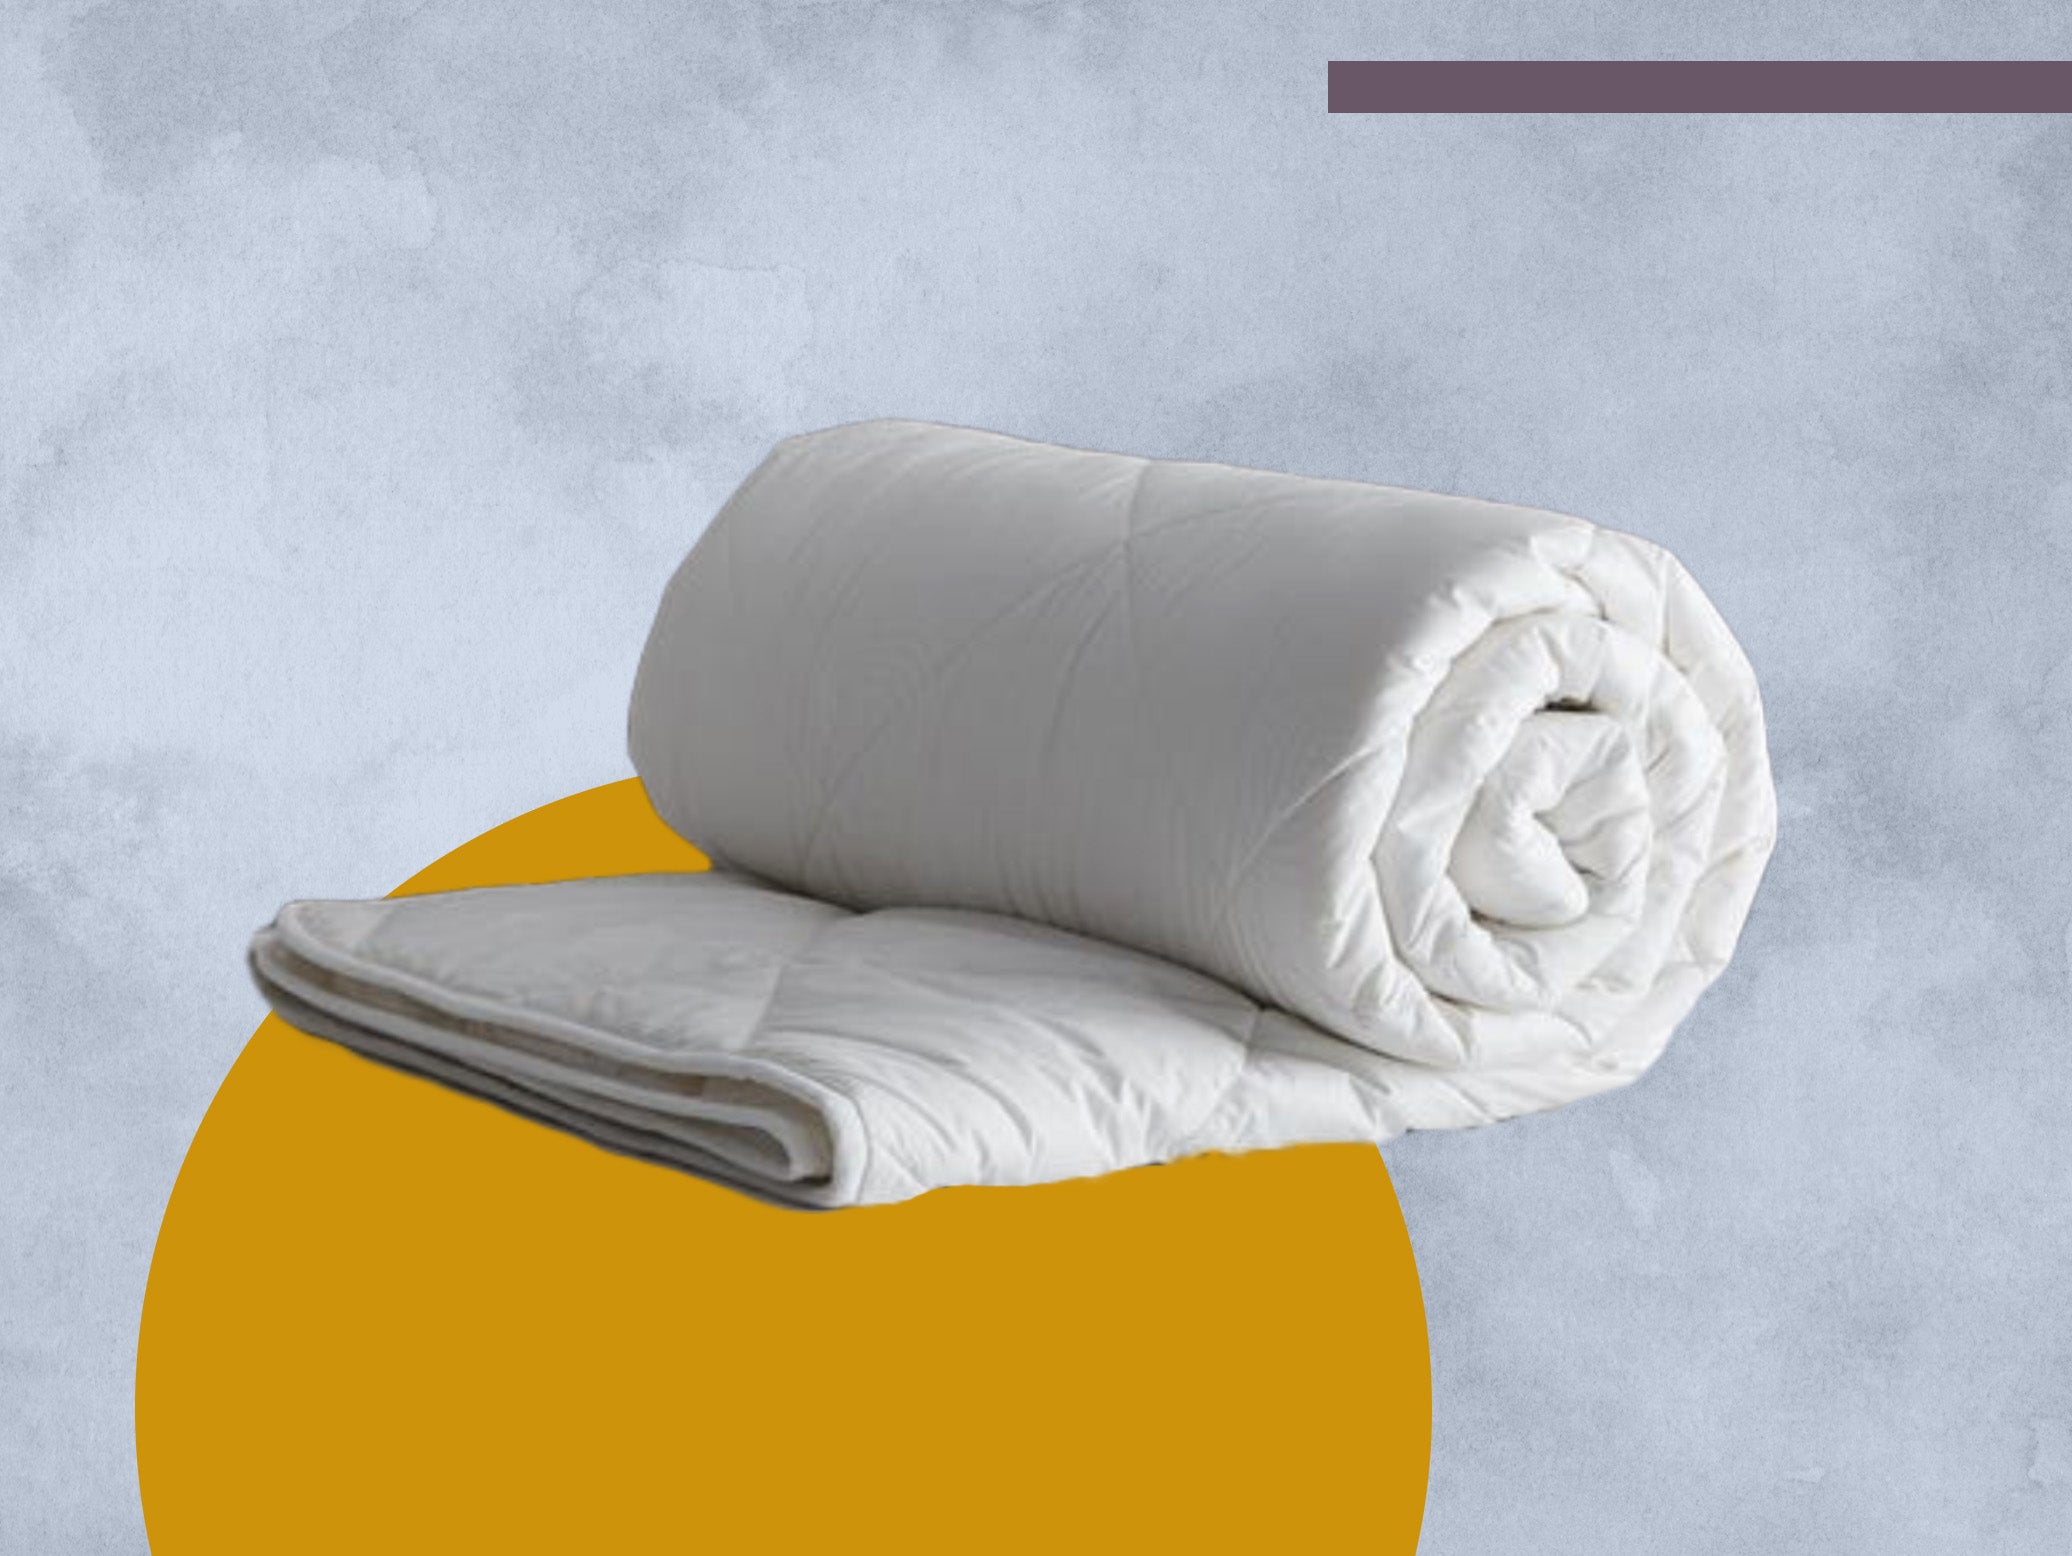 We decided to try a duvet that claimed it would regulate our temperature